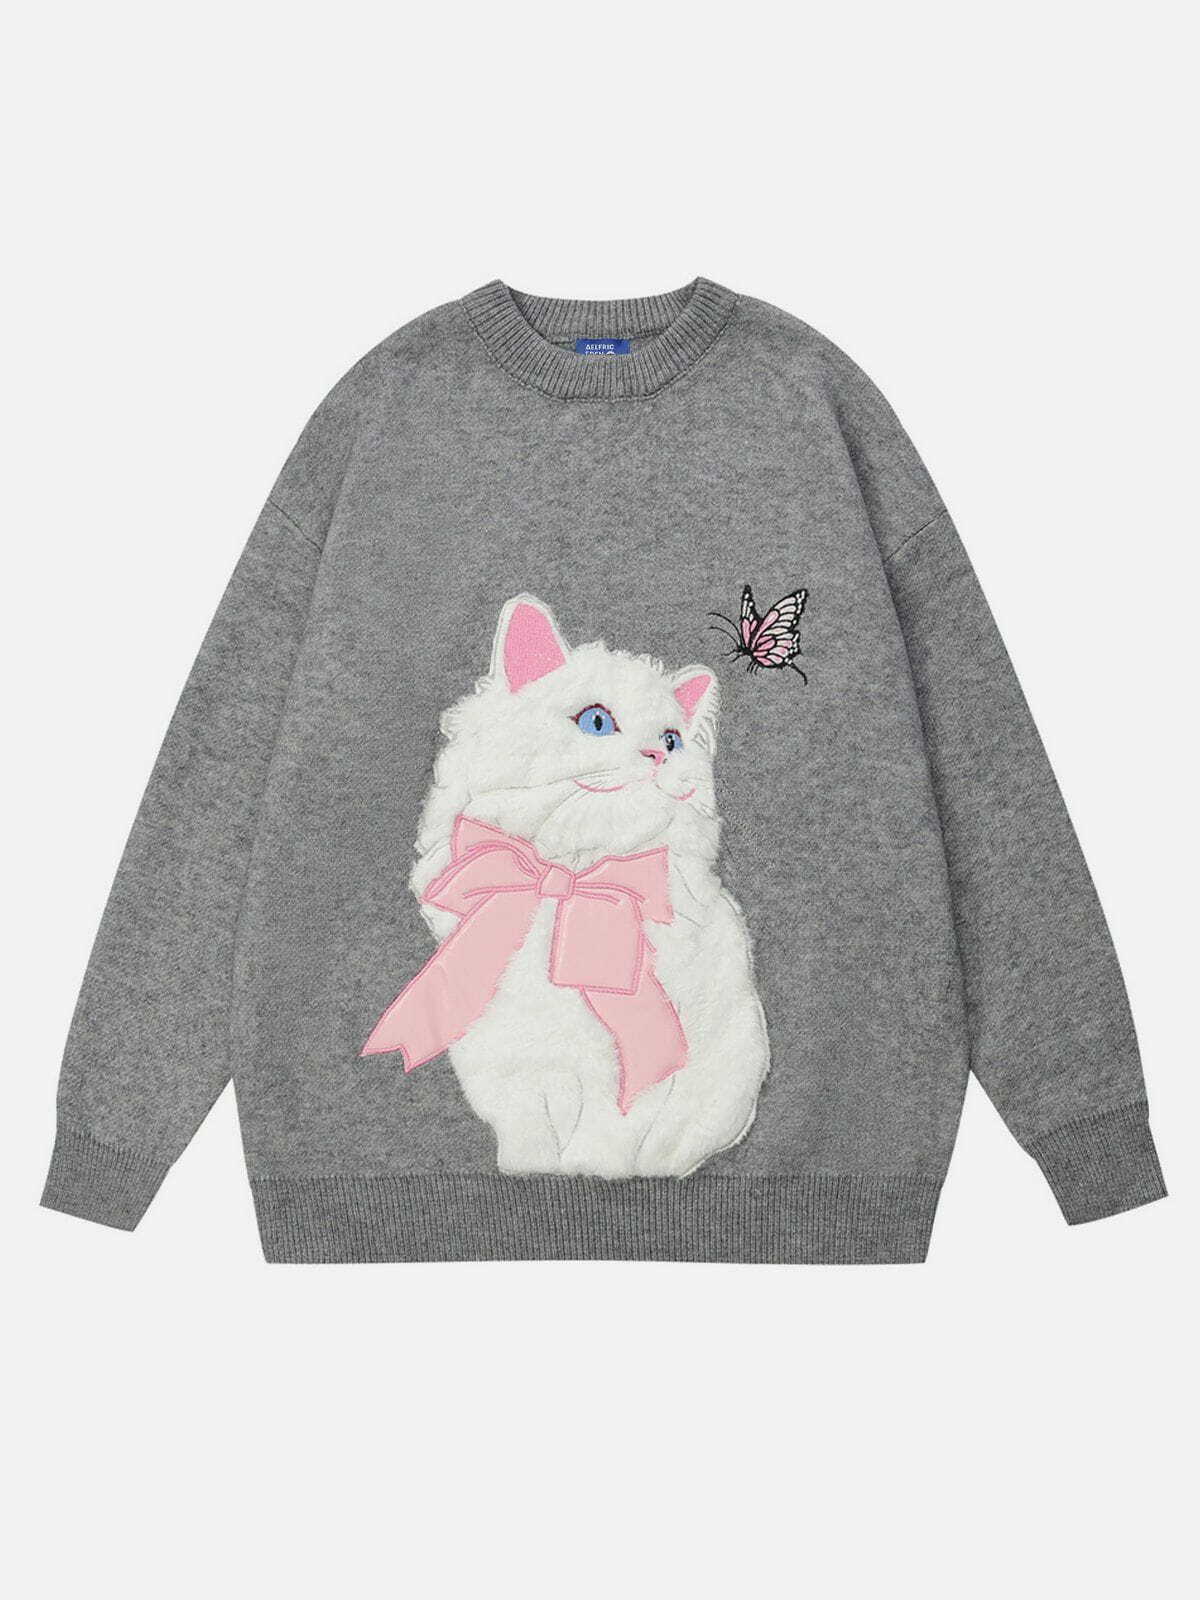 chic cat embroidery sweater youthful & trendy appeal 1302